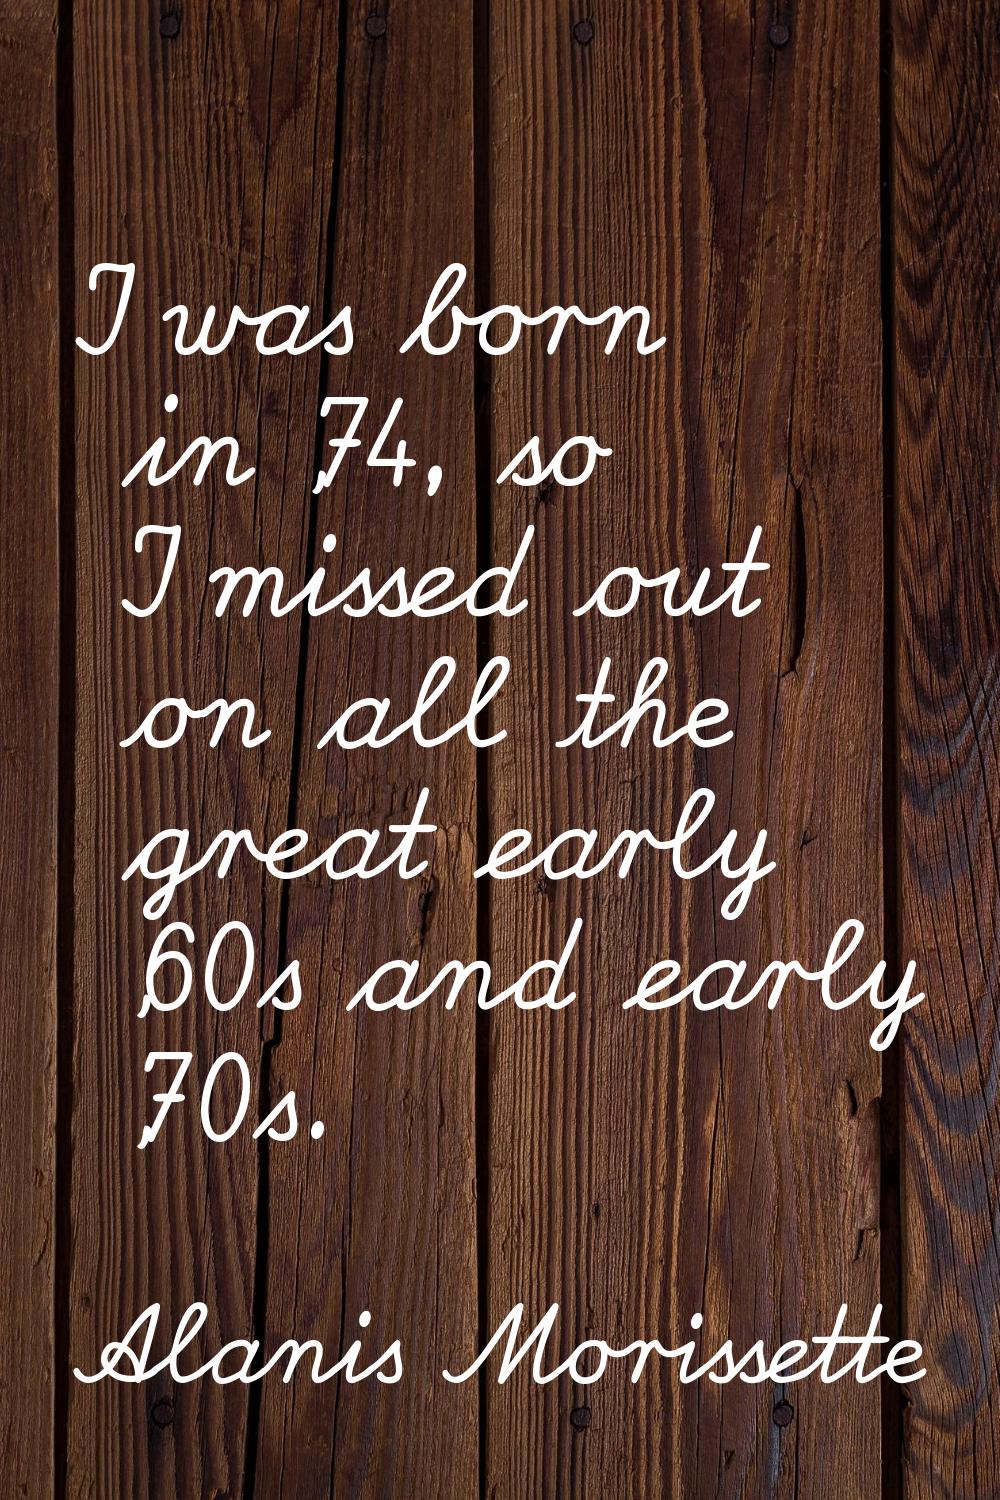 I was born in '74, so I missed out on all the great early '60s and early '70s.